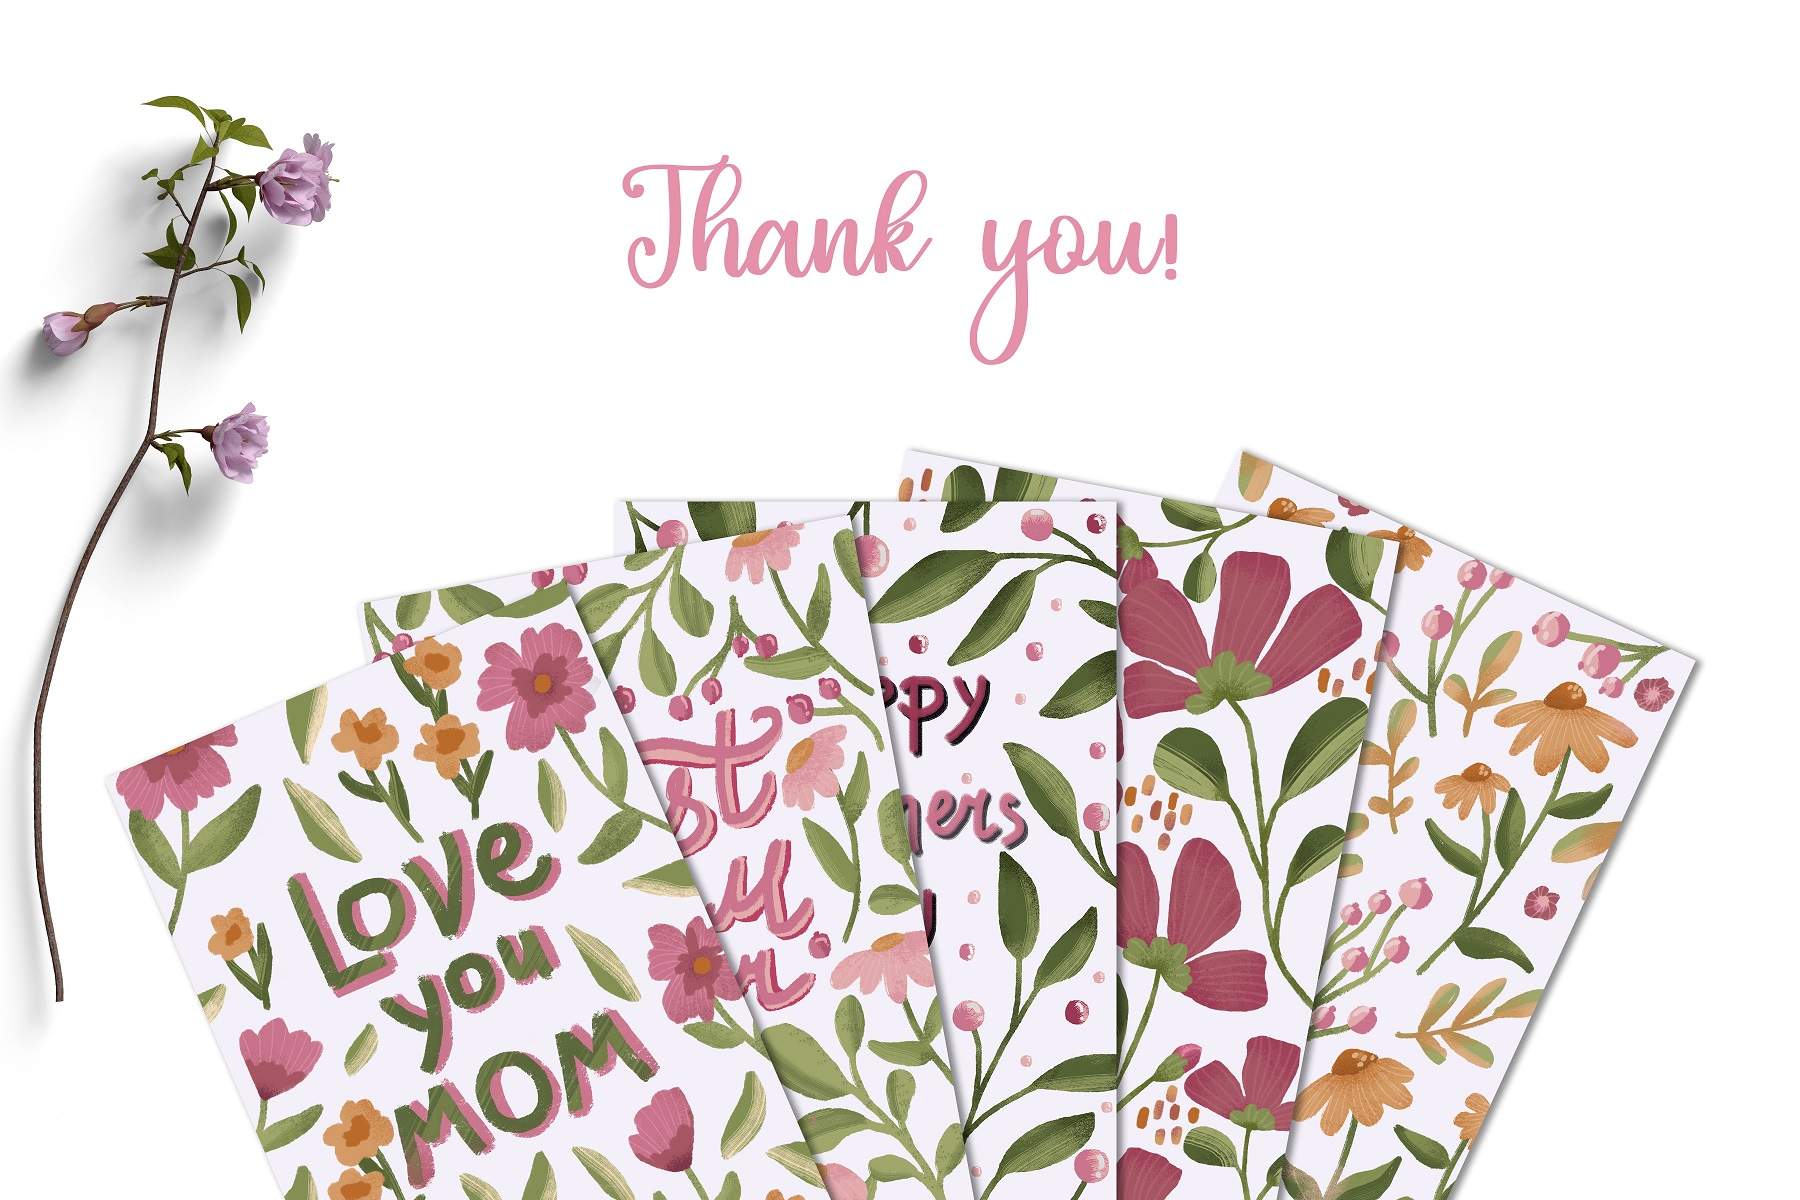 Set of thank you cards with flowers.